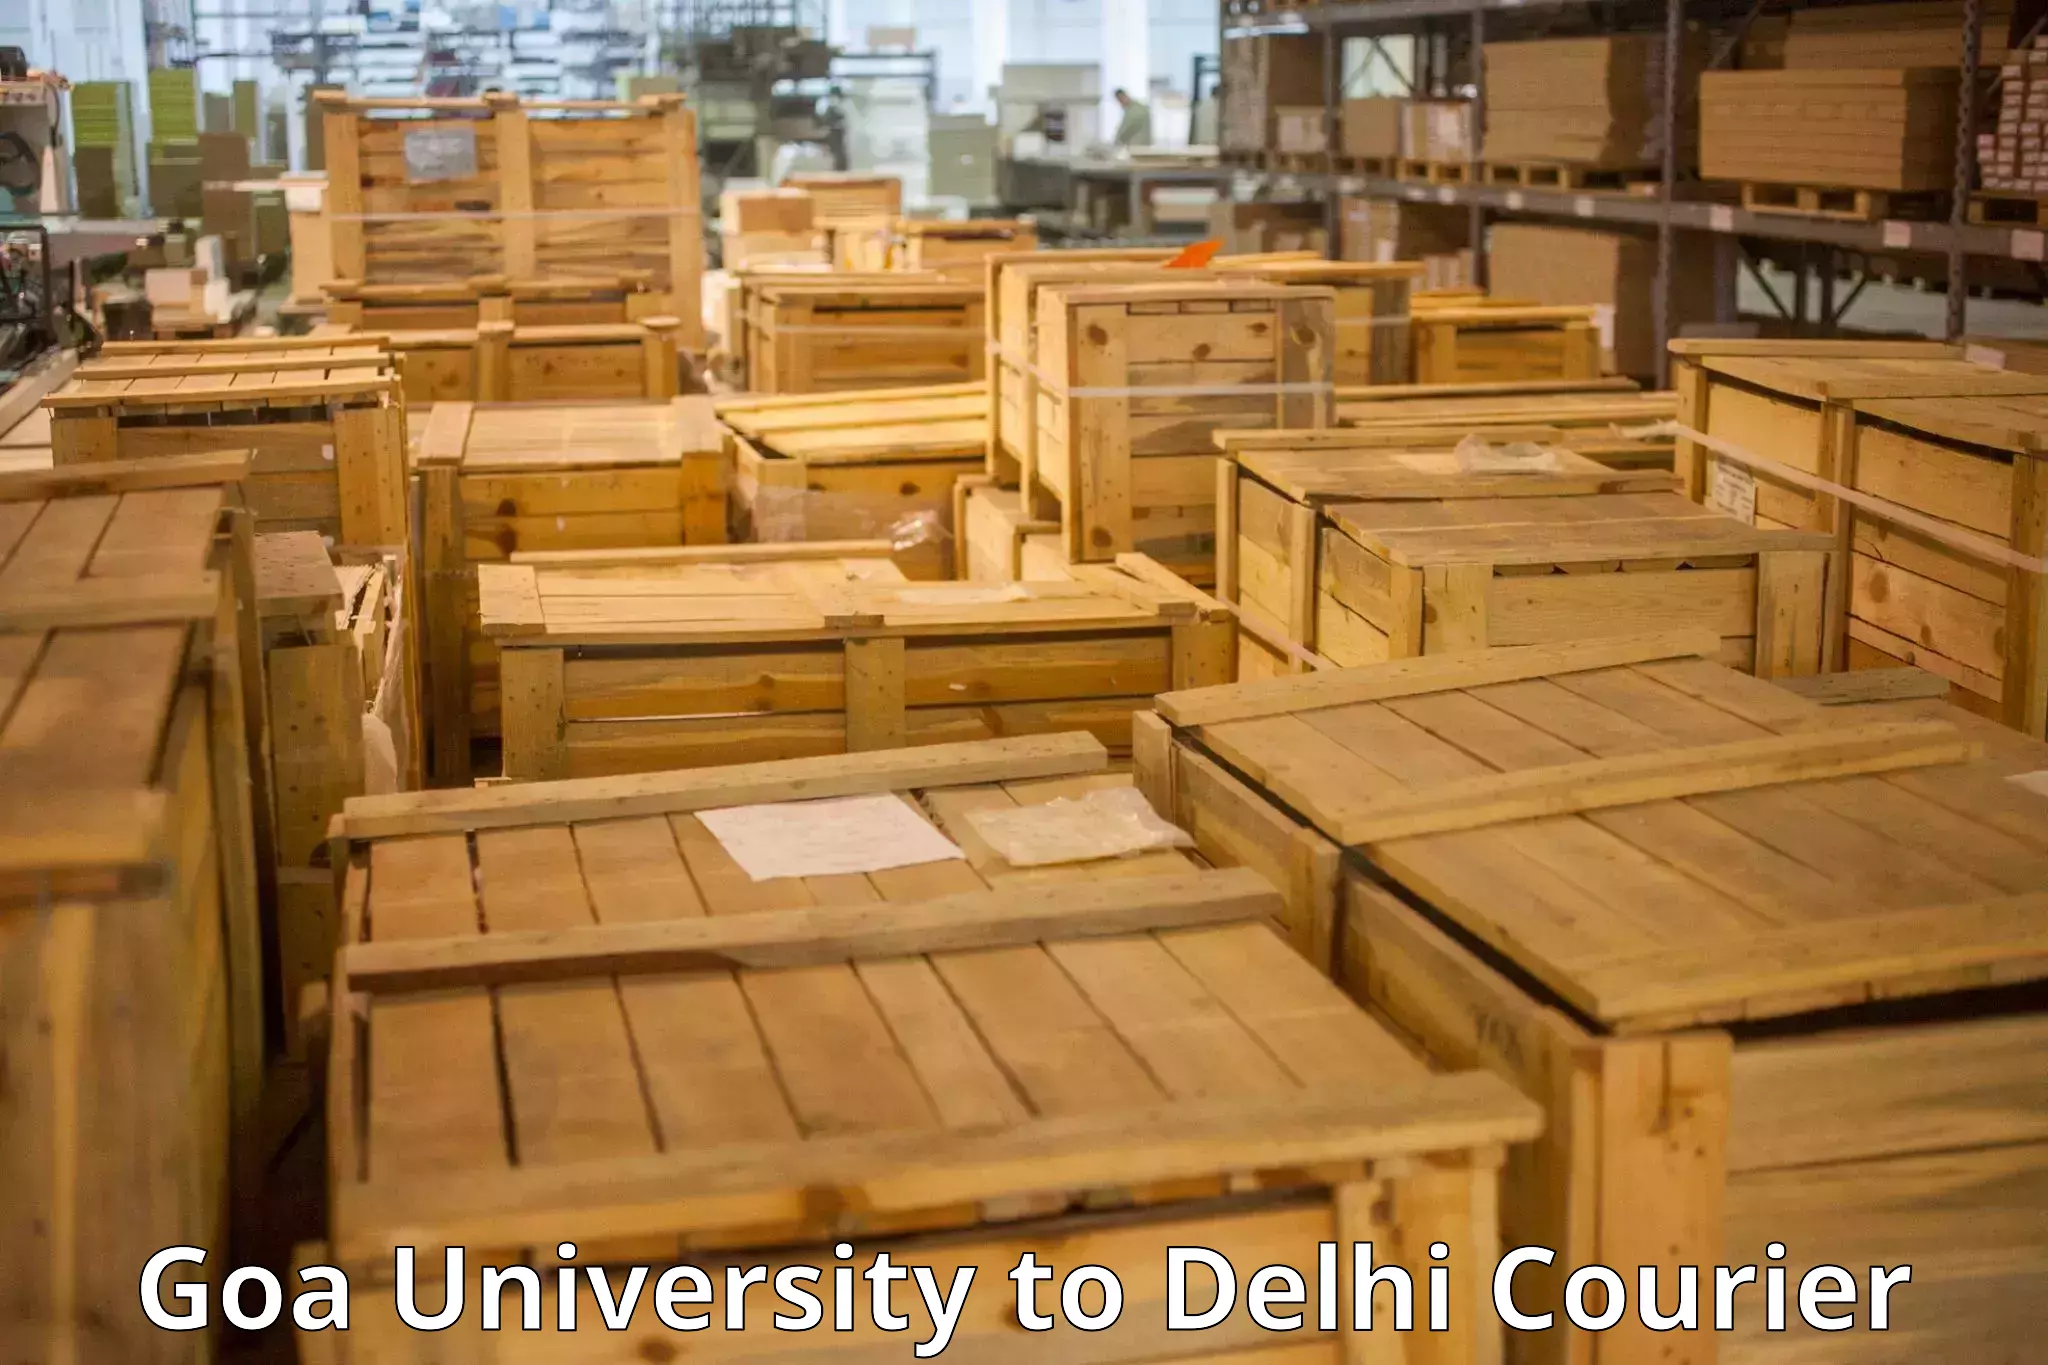 Personal effects shipping in Goa University to University of Delhi